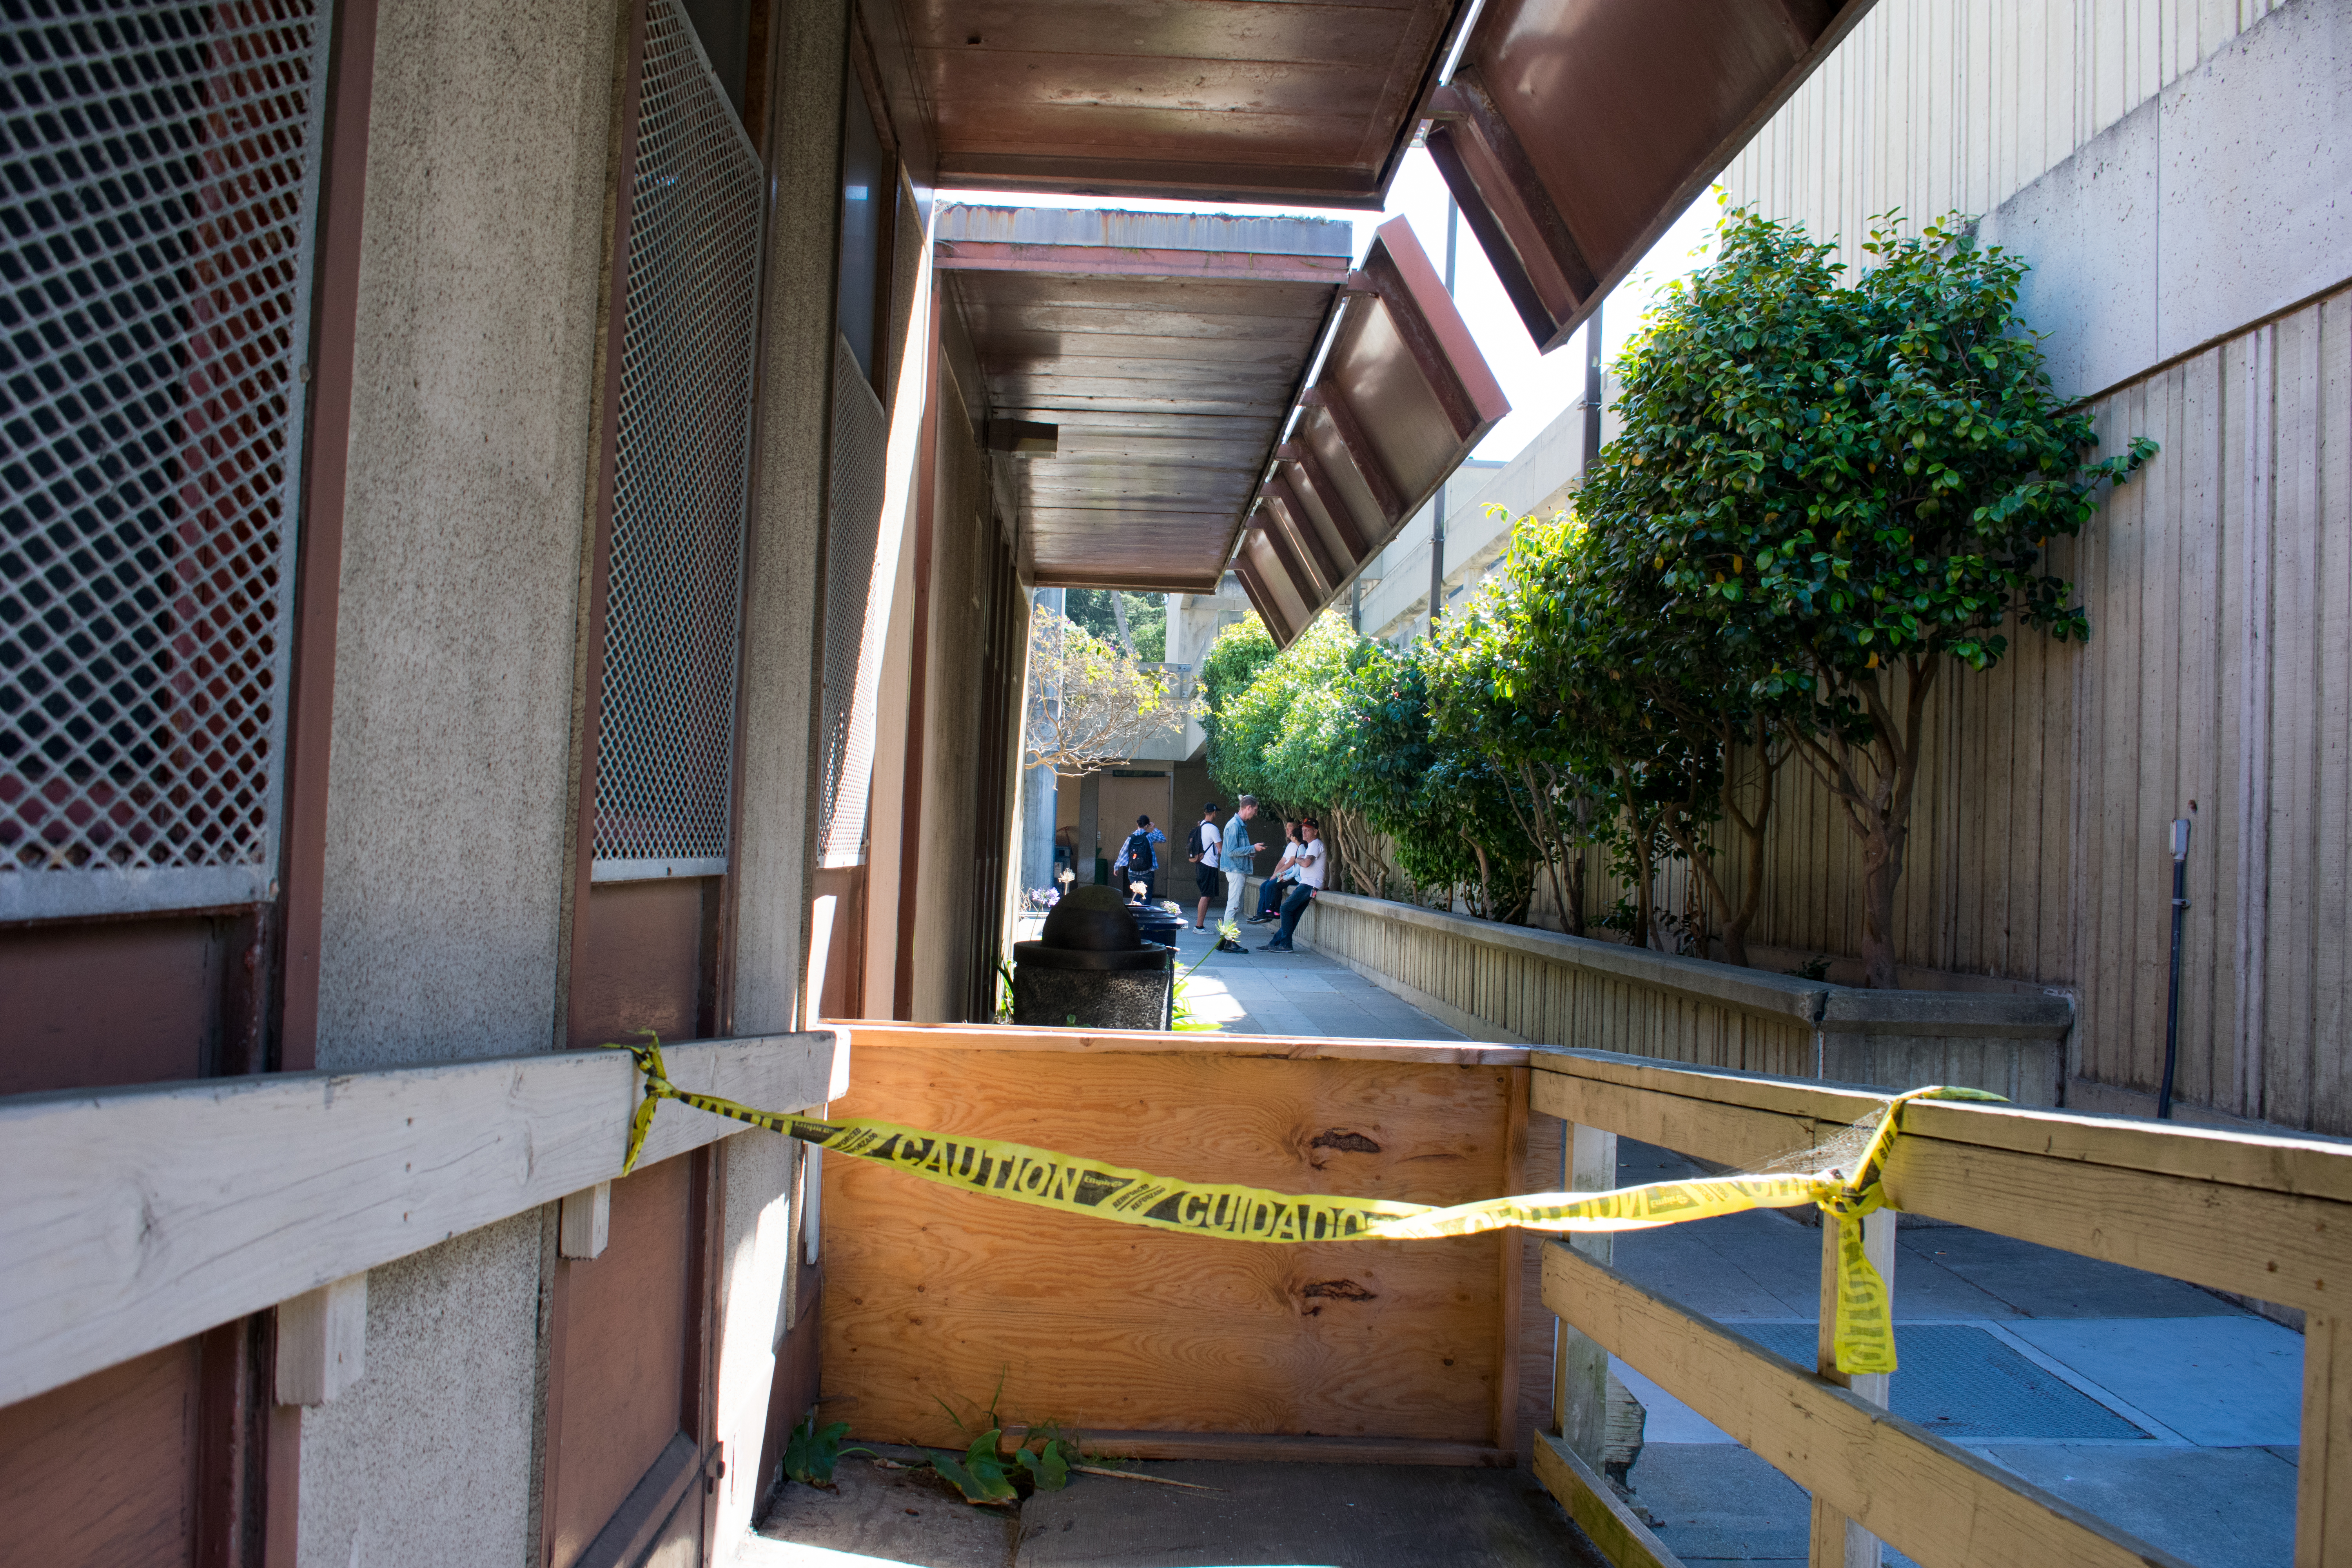 Taped up bungalows are seen scattered around the Arts building. October 7, 2017. Many of the buildings, including the Queer Resource Center have had mold and rodent infestations, San Francisco. (AP Photo / Julia Fuller) 